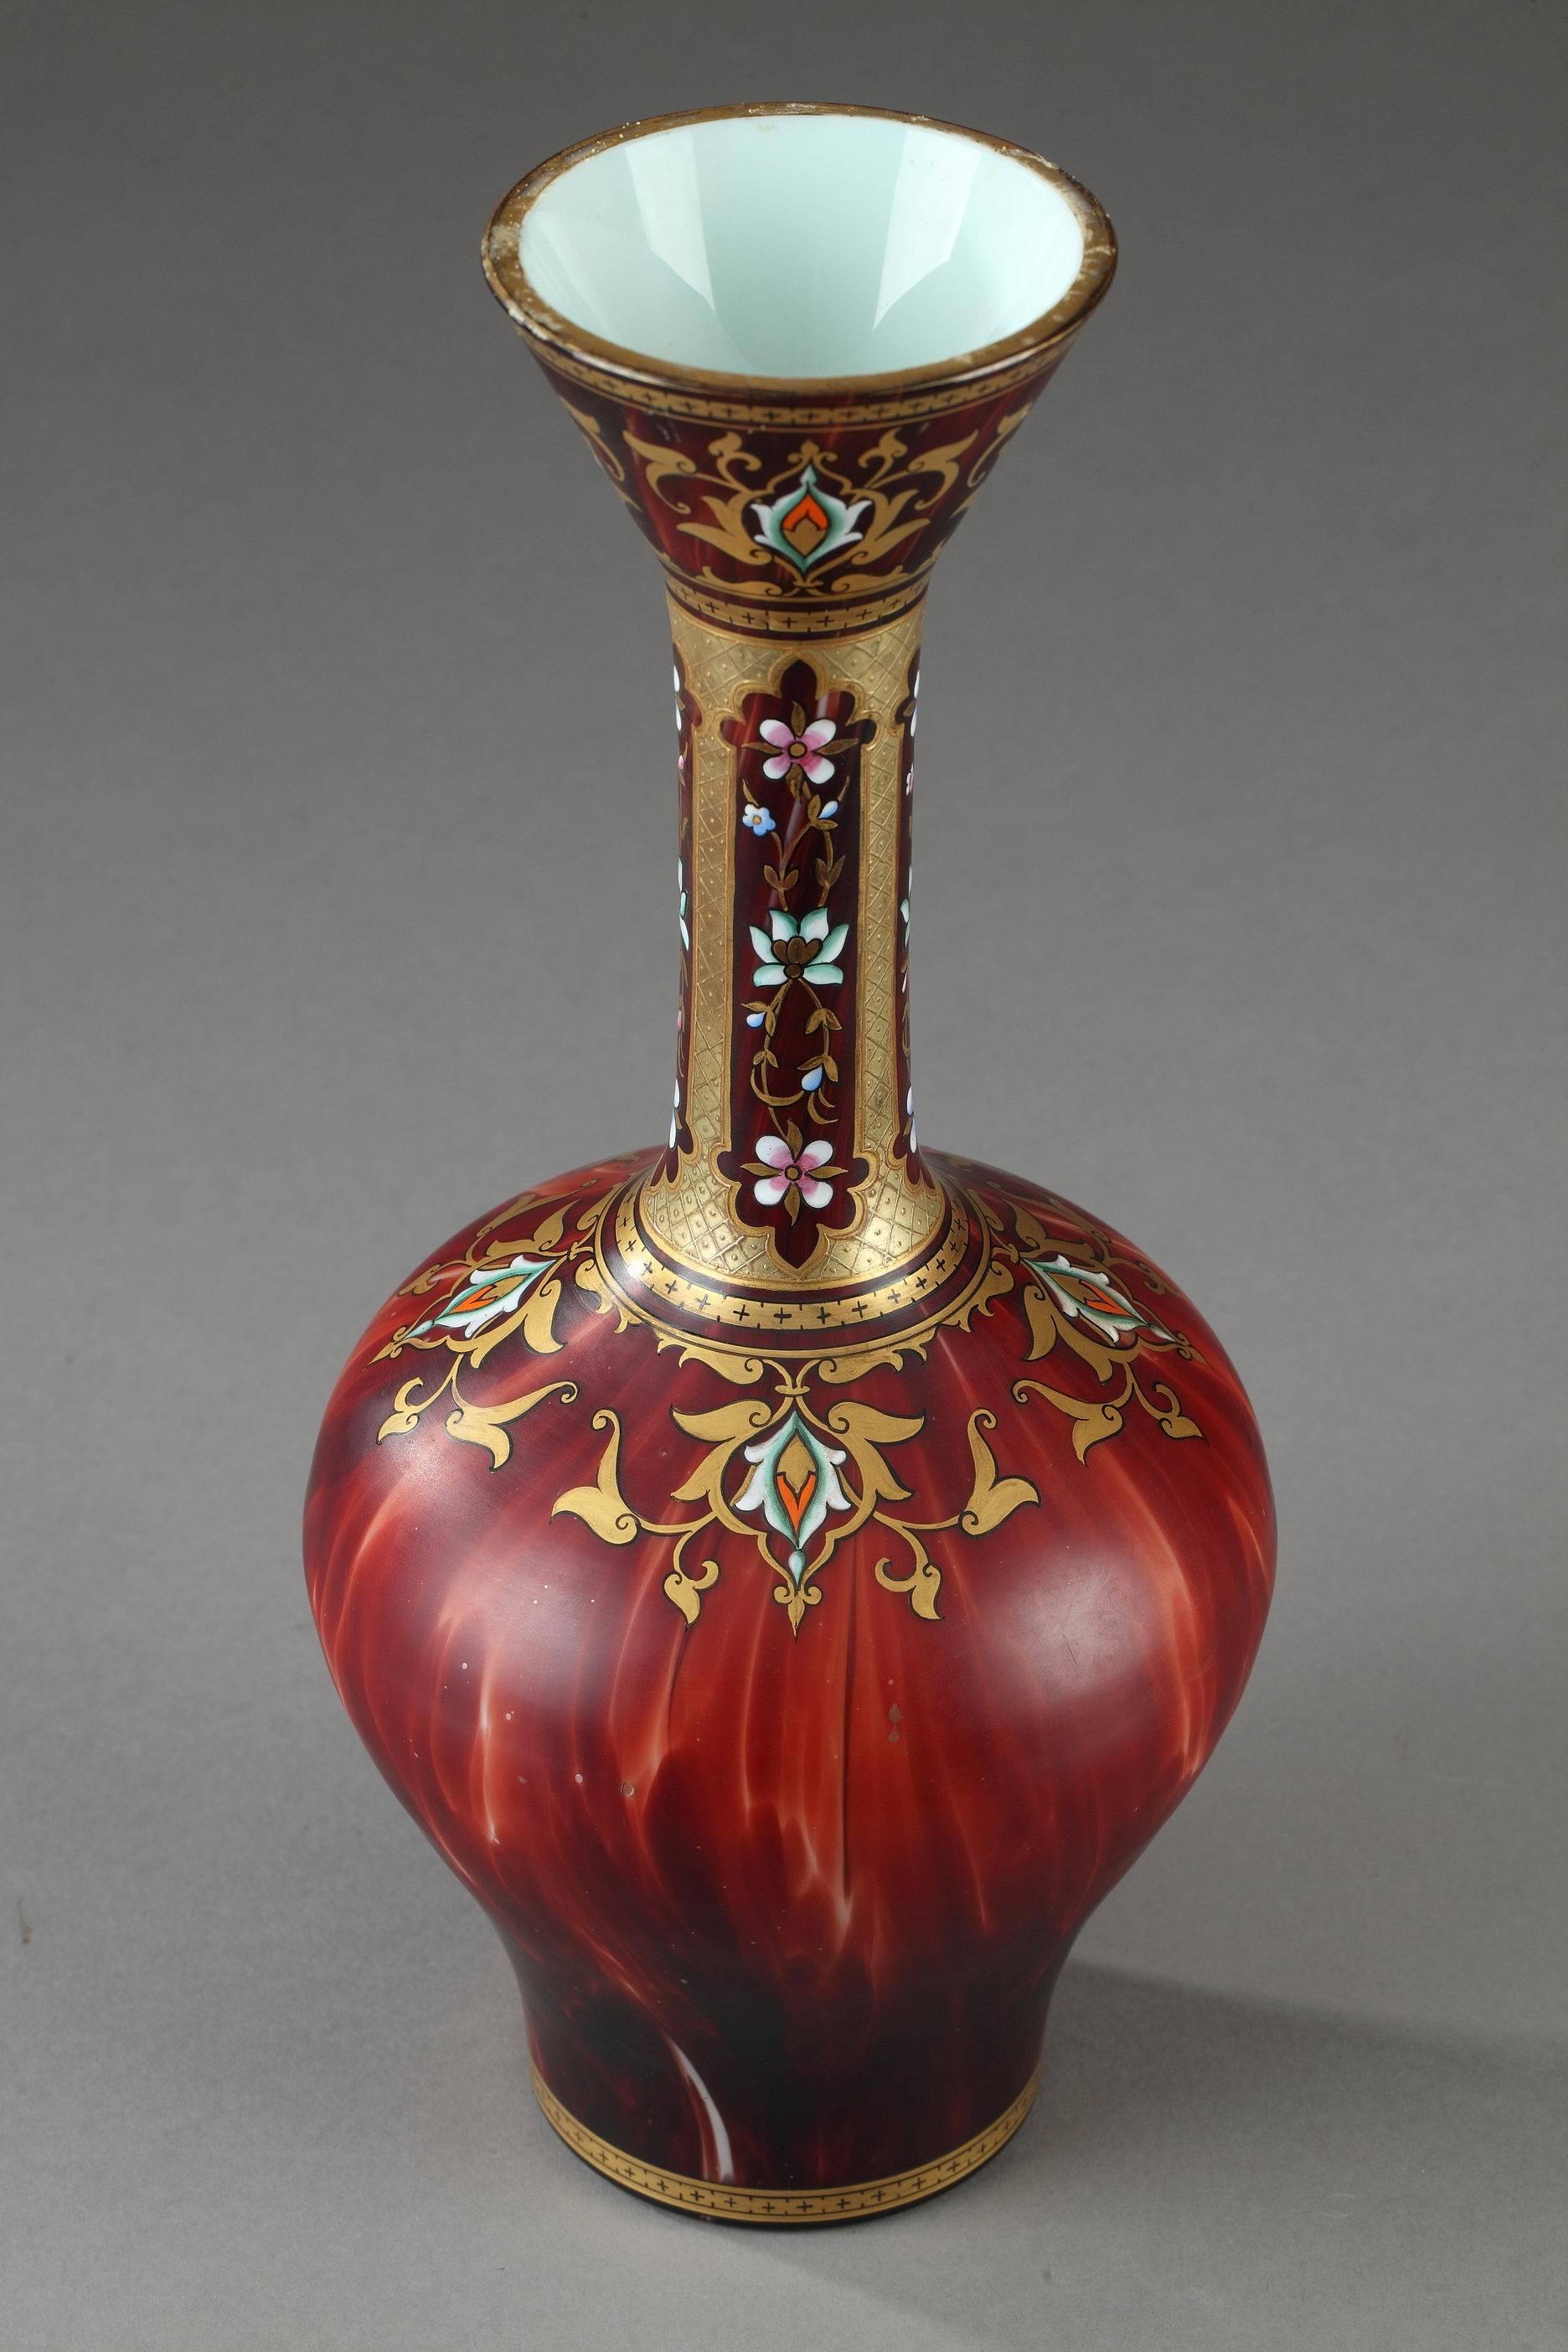 Bulb-bottomed vase with long neck decorated with multicolored enamel and gold. It is embellished with arabesques, flowers and latticework patterns in orientalist taste on a marbled Bordeaux background. Remnants of a mark underneath. 

The